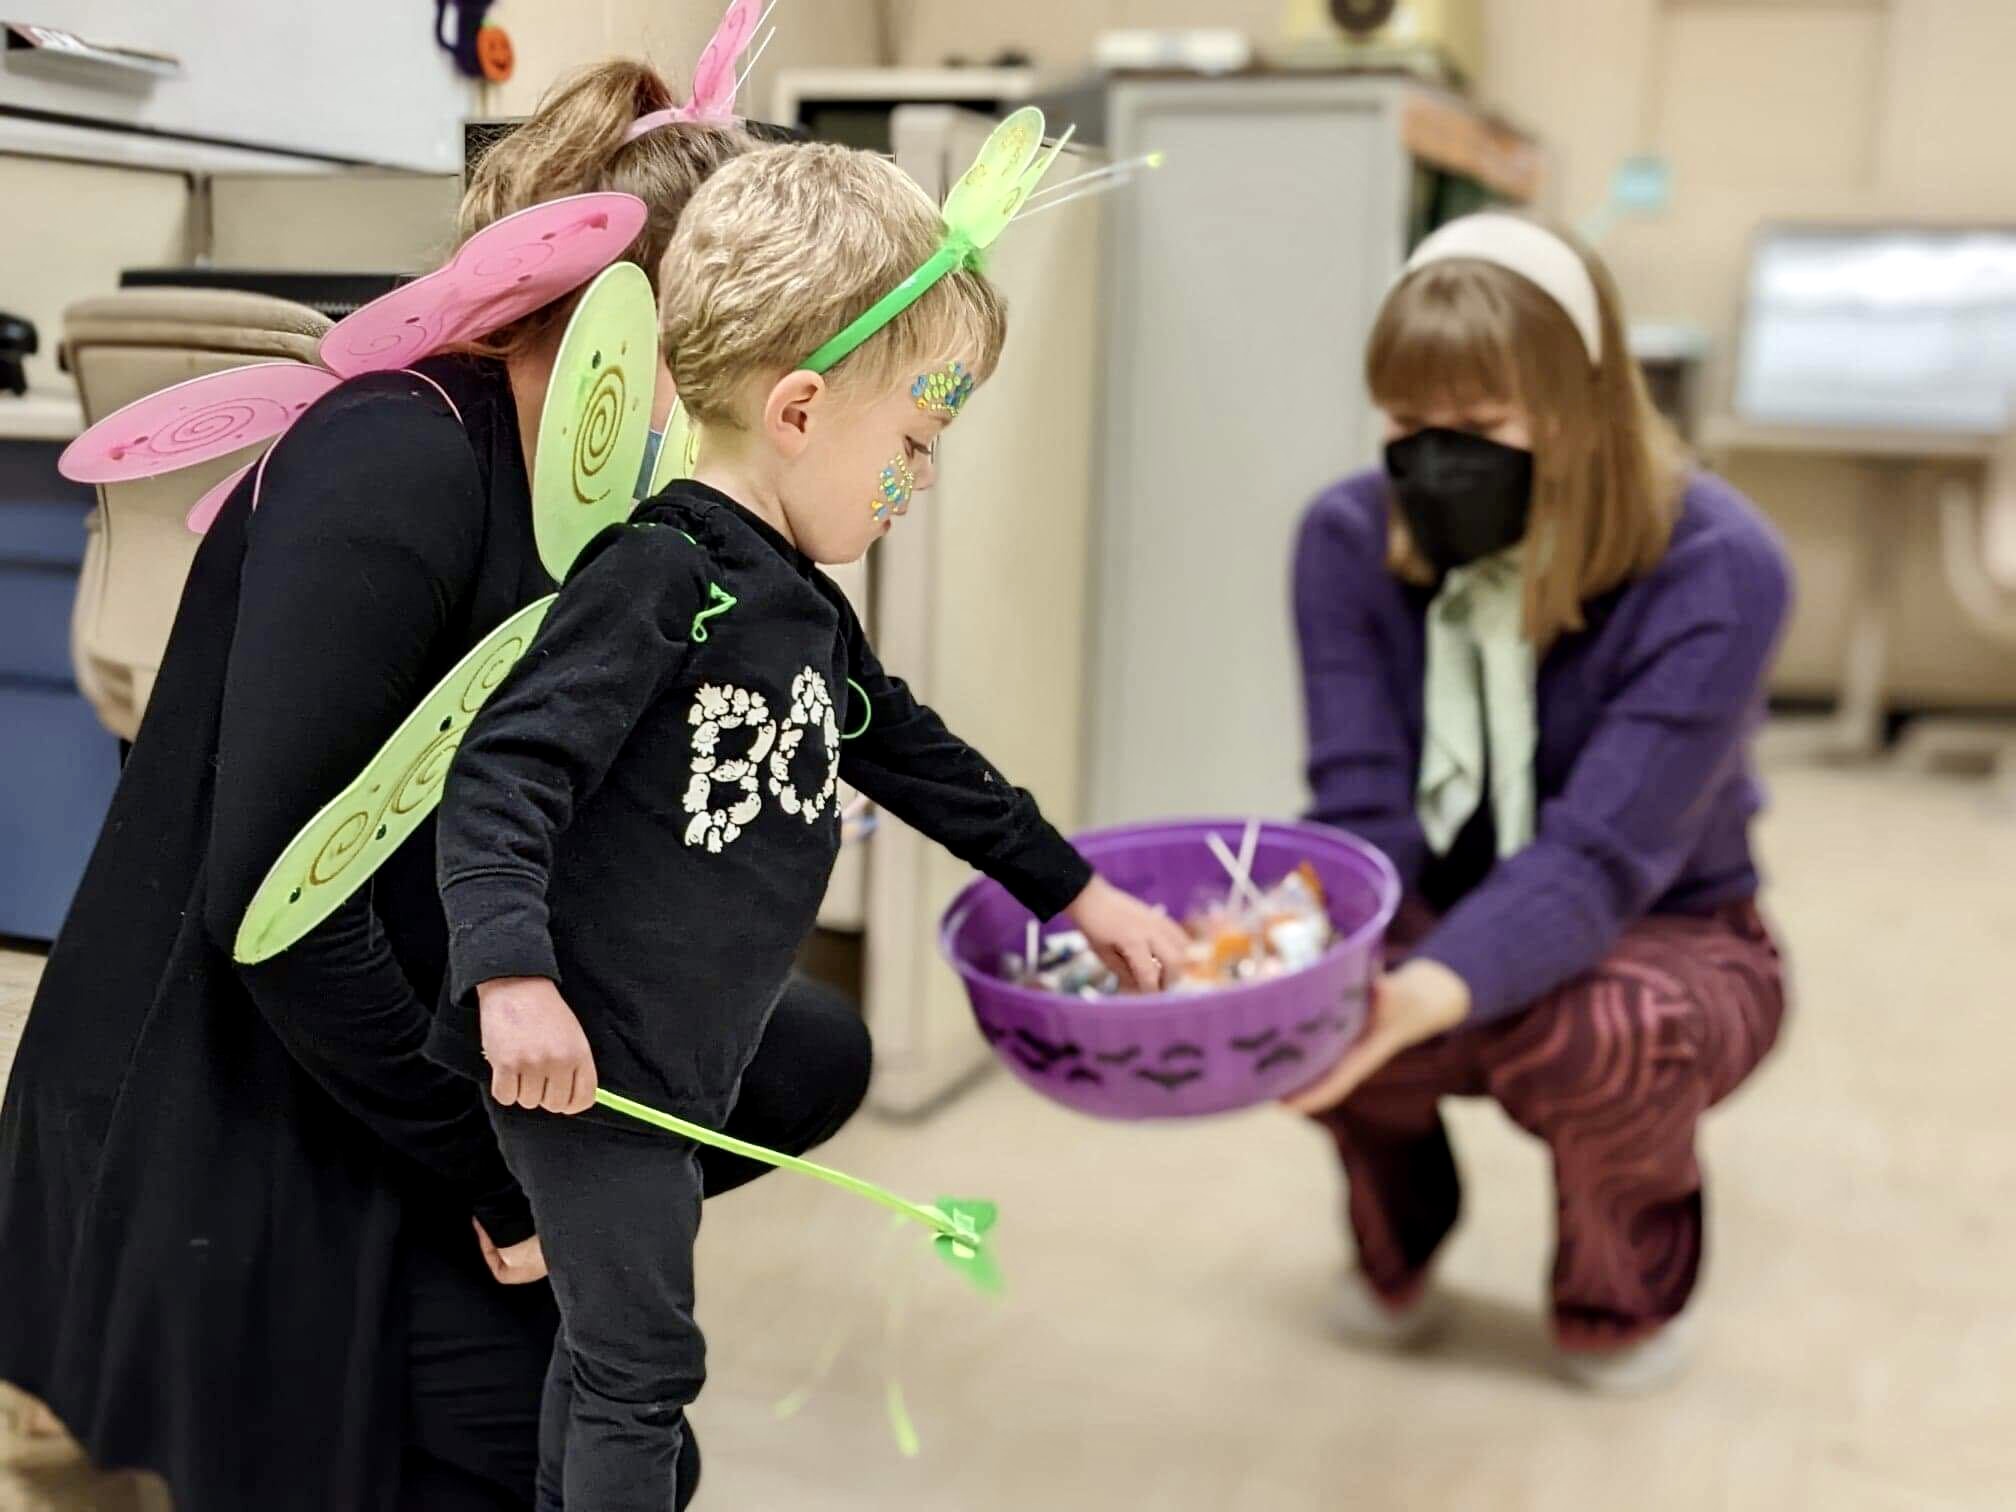 Toddlers' Halloween Hunt guests dress as butterflies and search for candy in a bowl being held by Diefenbunker staff.